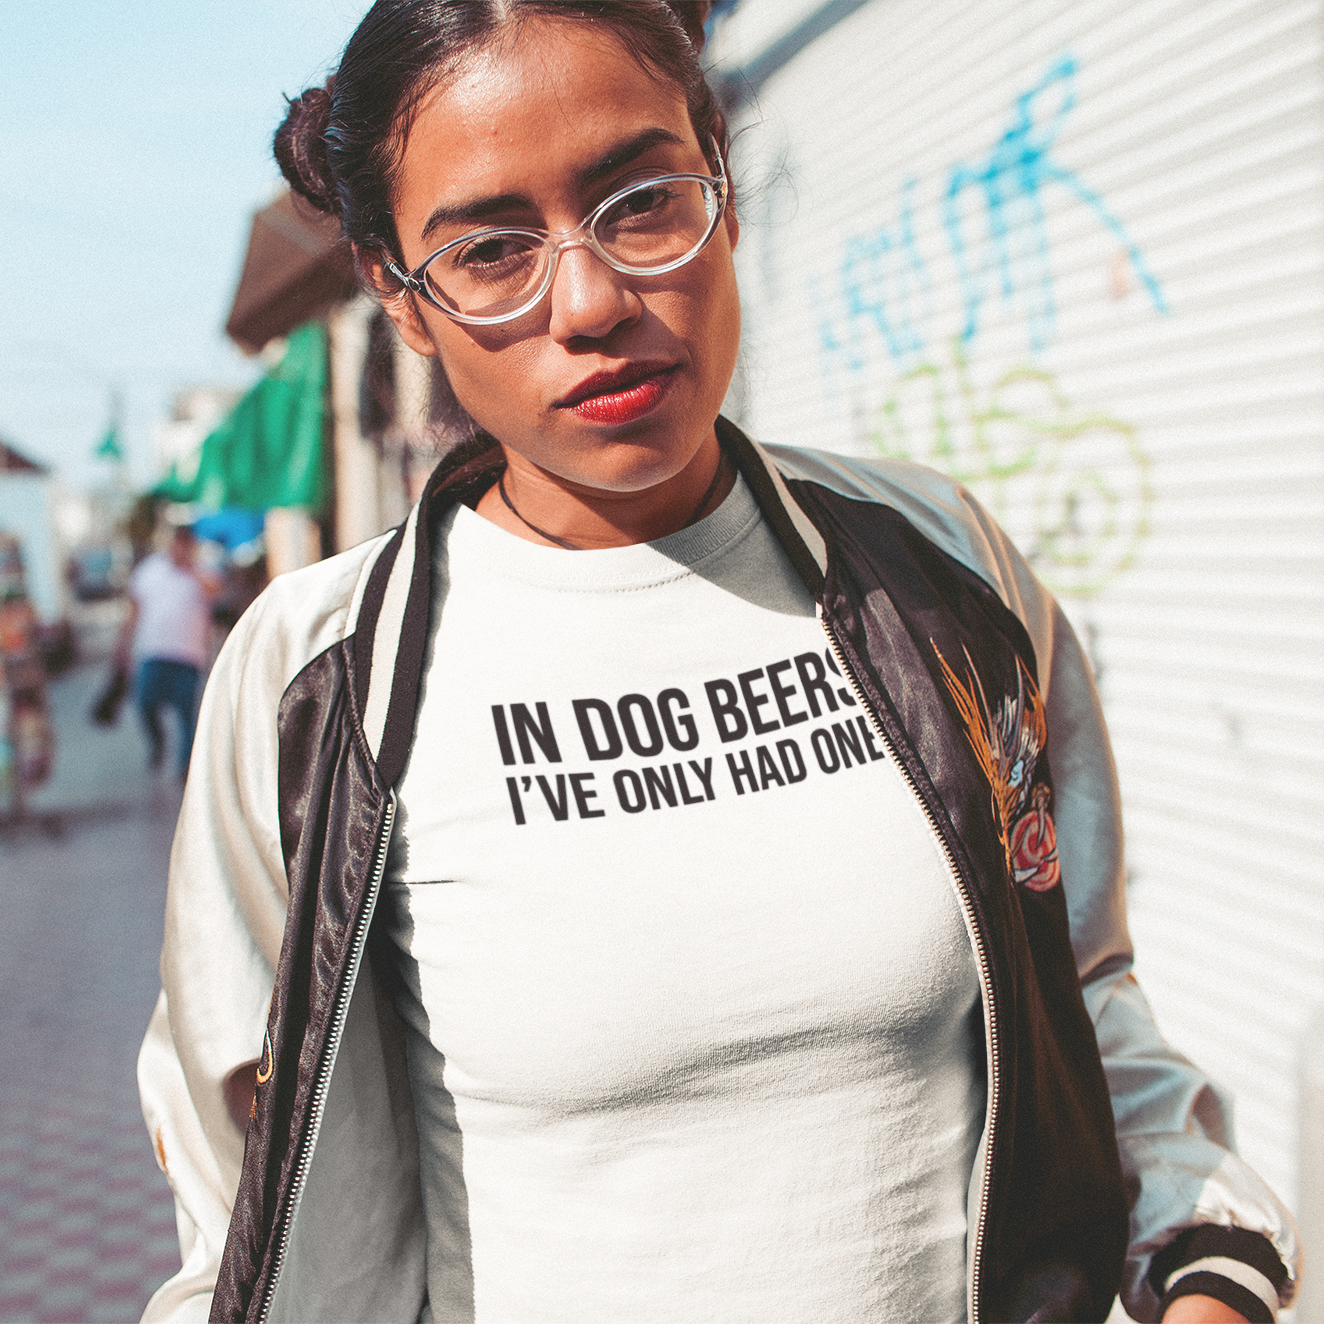 'In dog beers, I've only had one' adult shirt